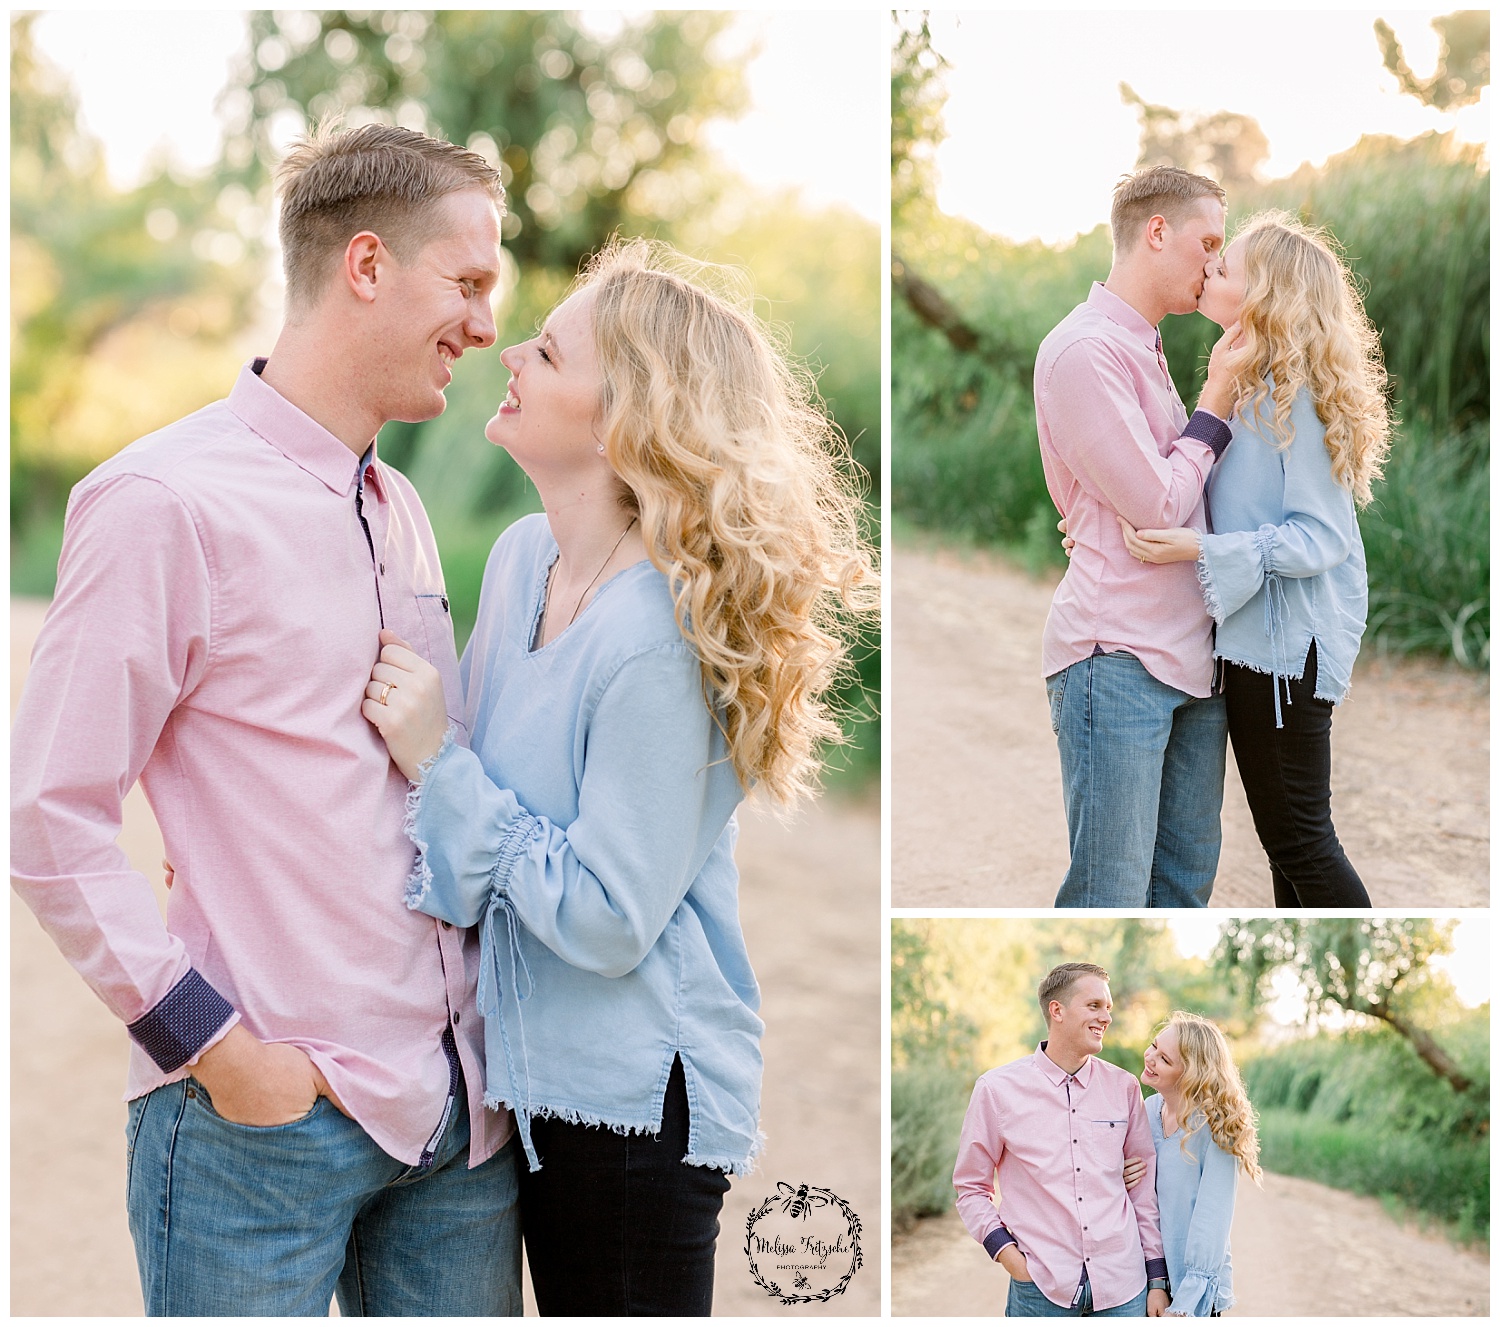 What to wear to your enggement session. Chambray top and pink button down. Engagement session in Tucson, Arizona by Tucson Wedding Photographer Melissa Fritzsche Photography.